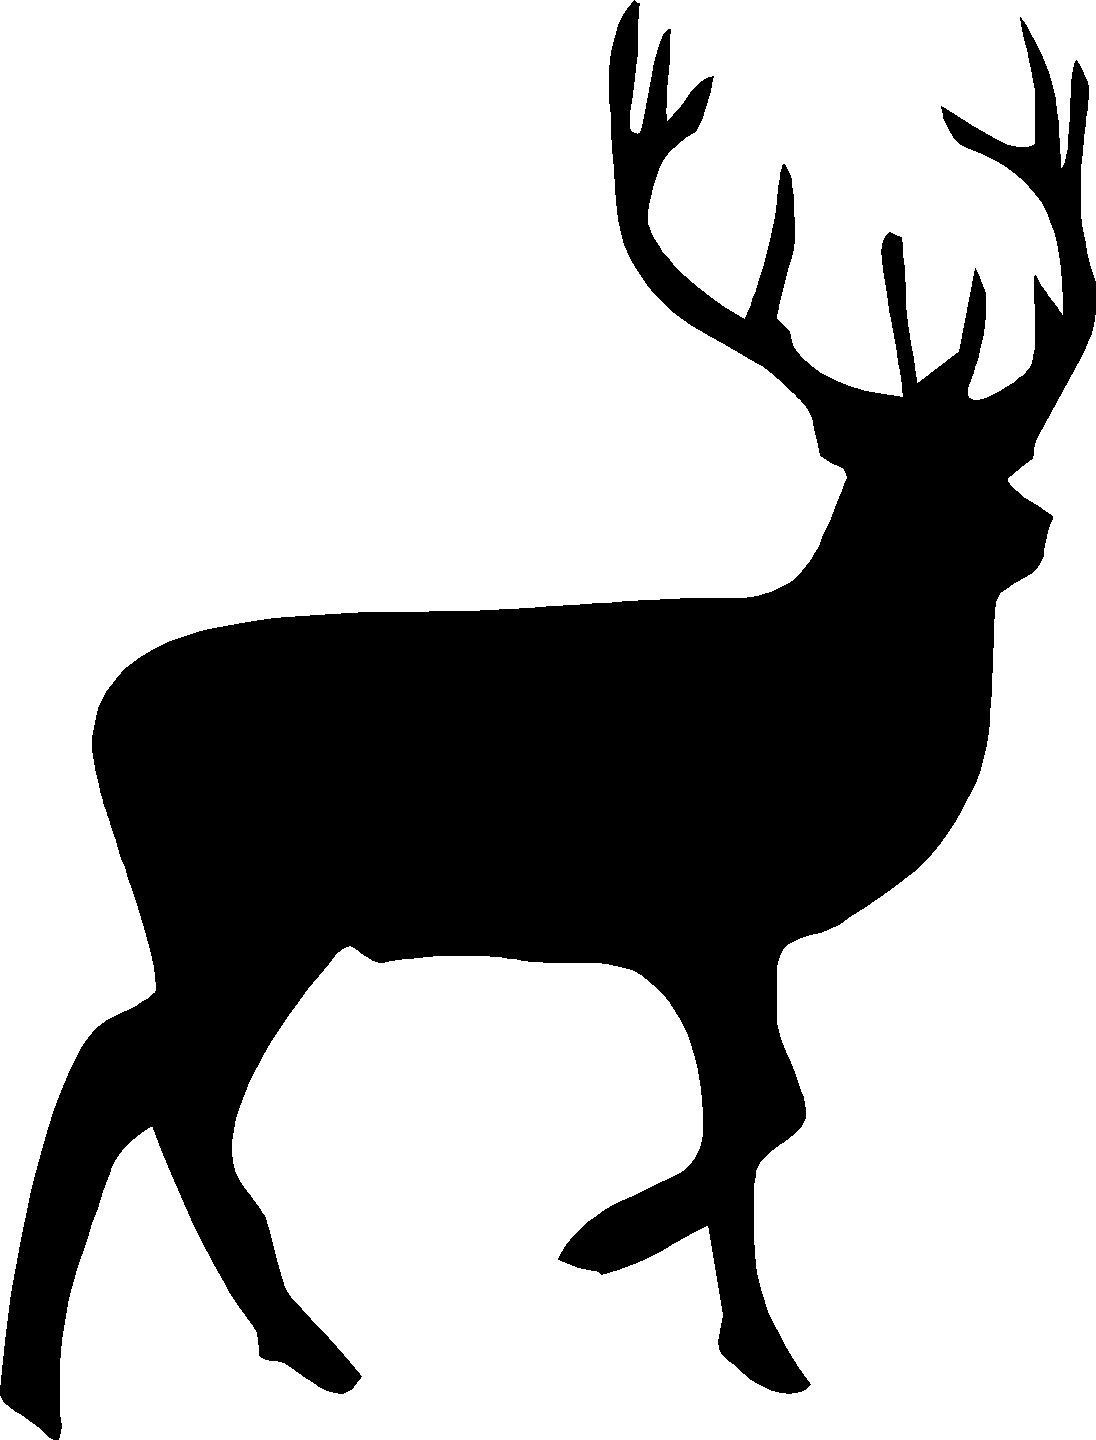 Jumping Stag Silhouette Clip Art - ClipArt Best